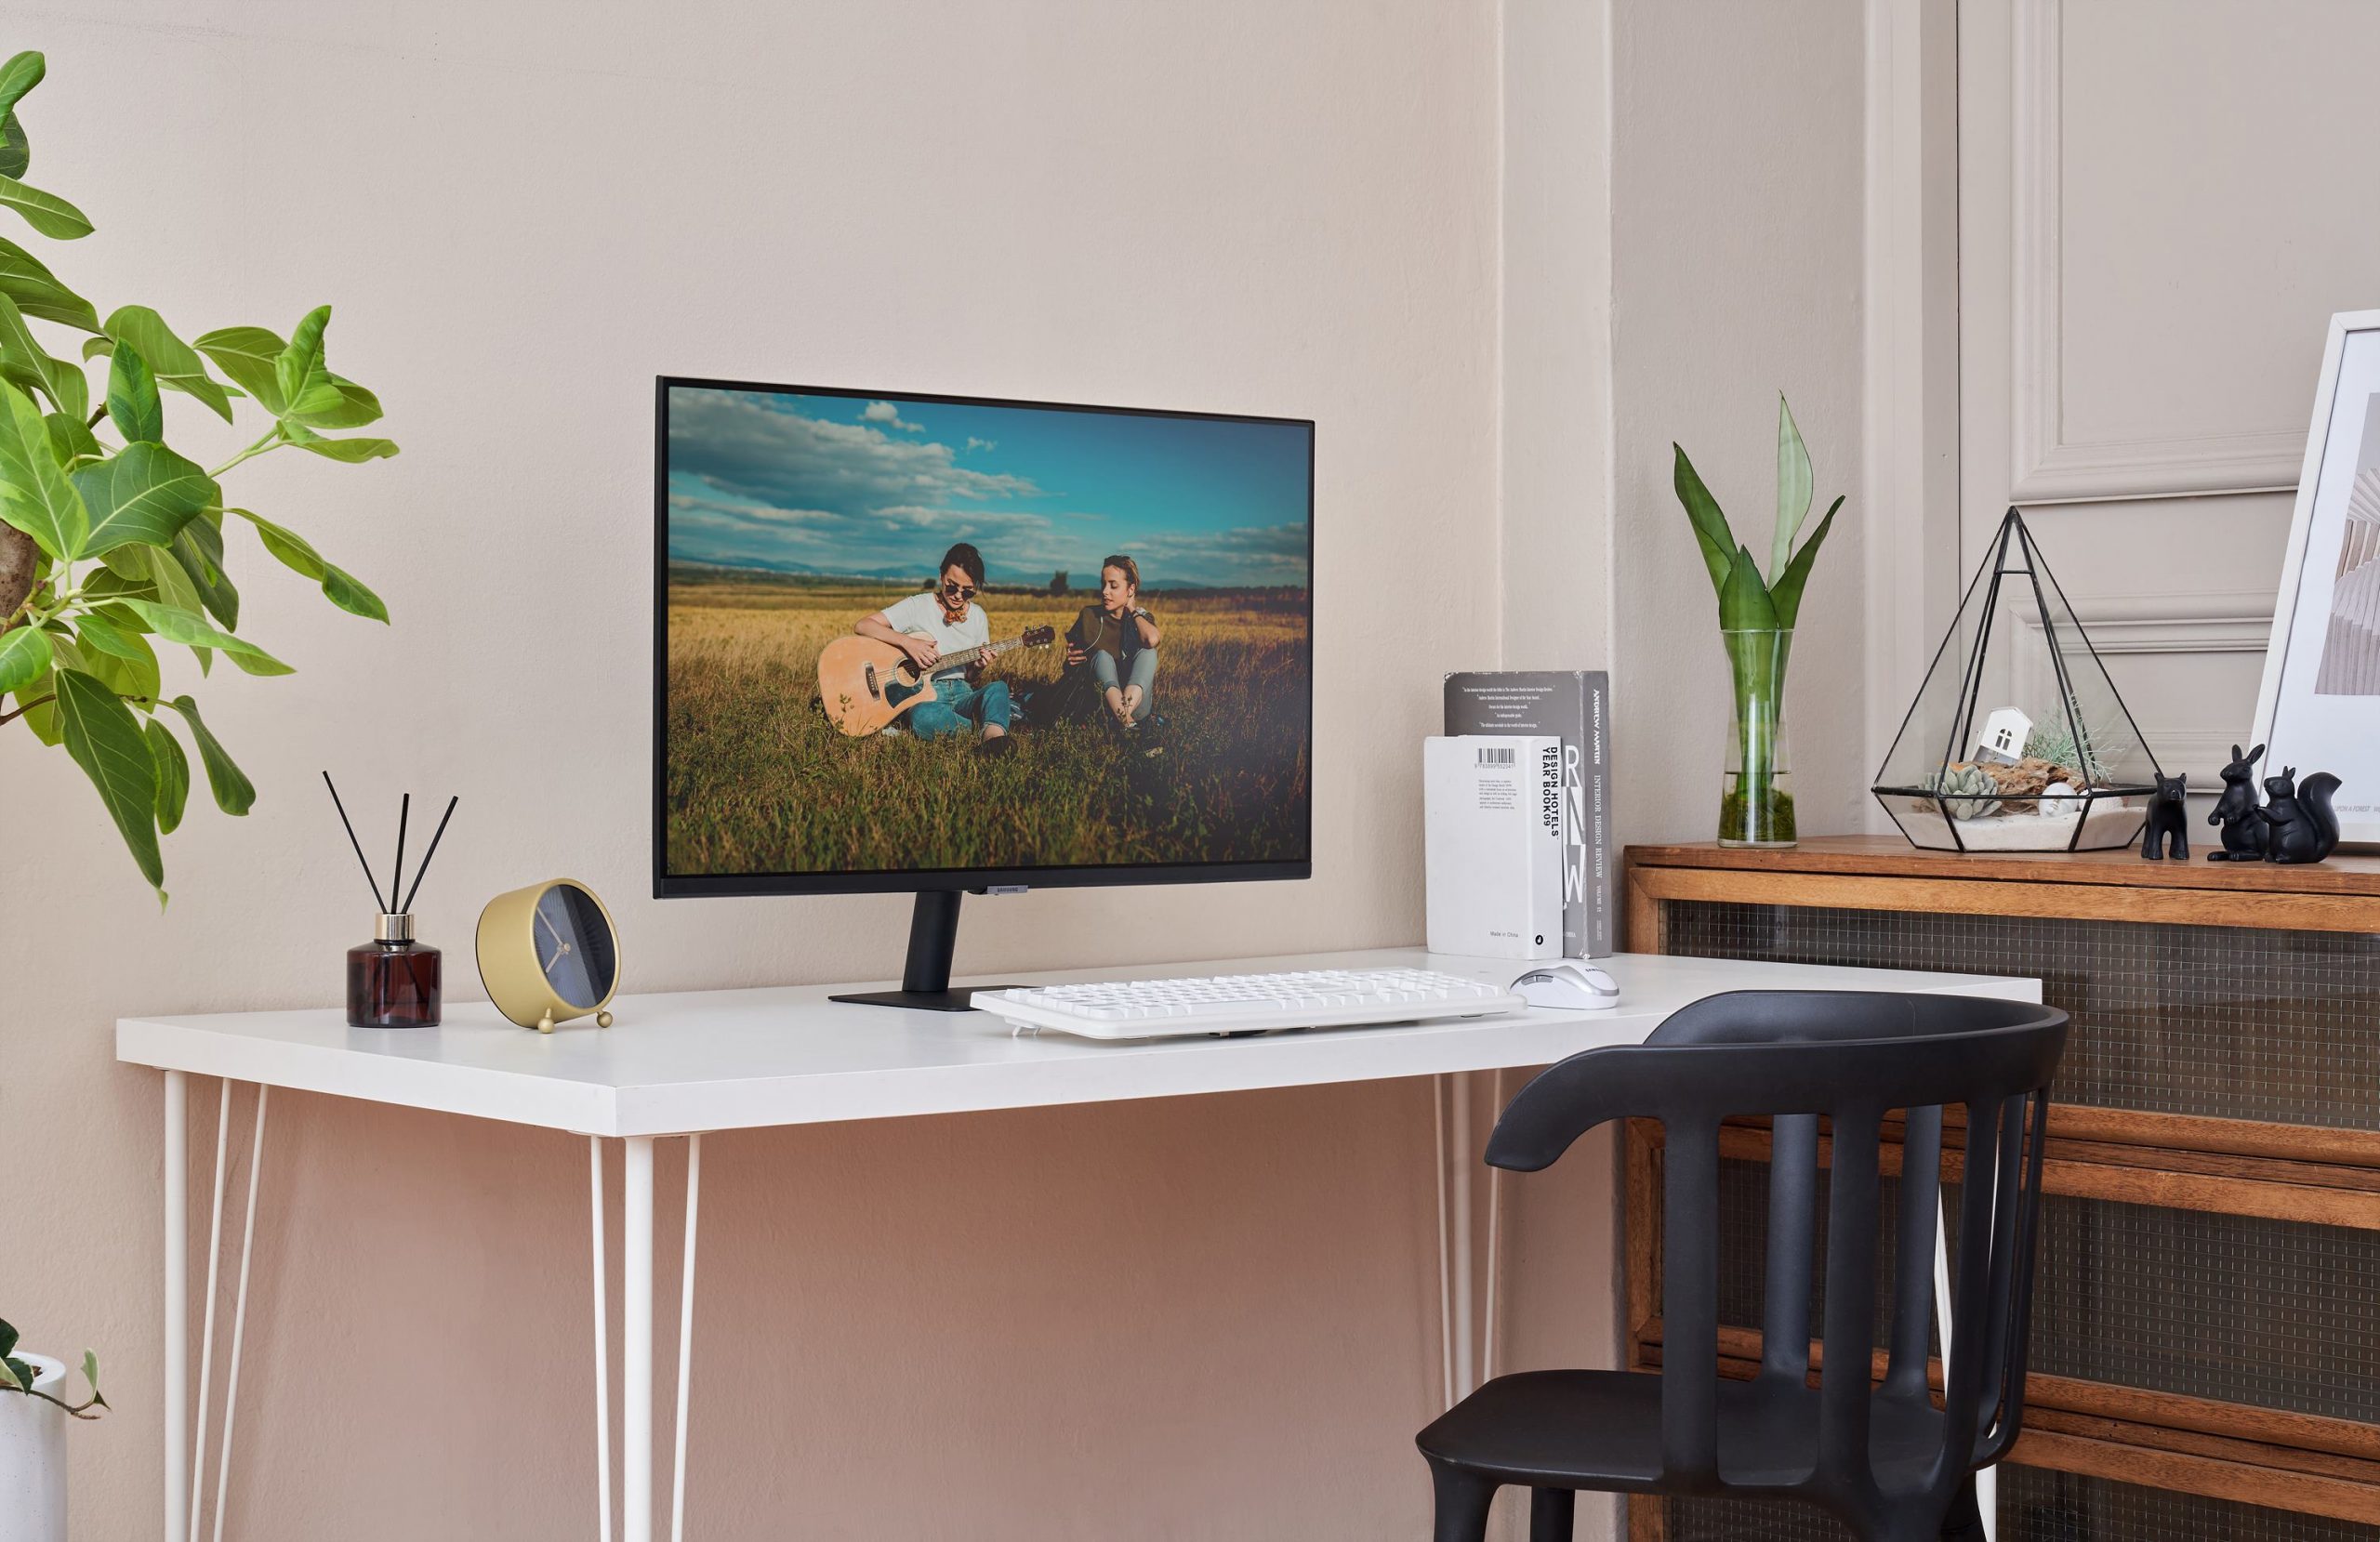 Smart Monitor Press Release dl2F scaled Samsung Puts Smart TV Tech In New Monitor